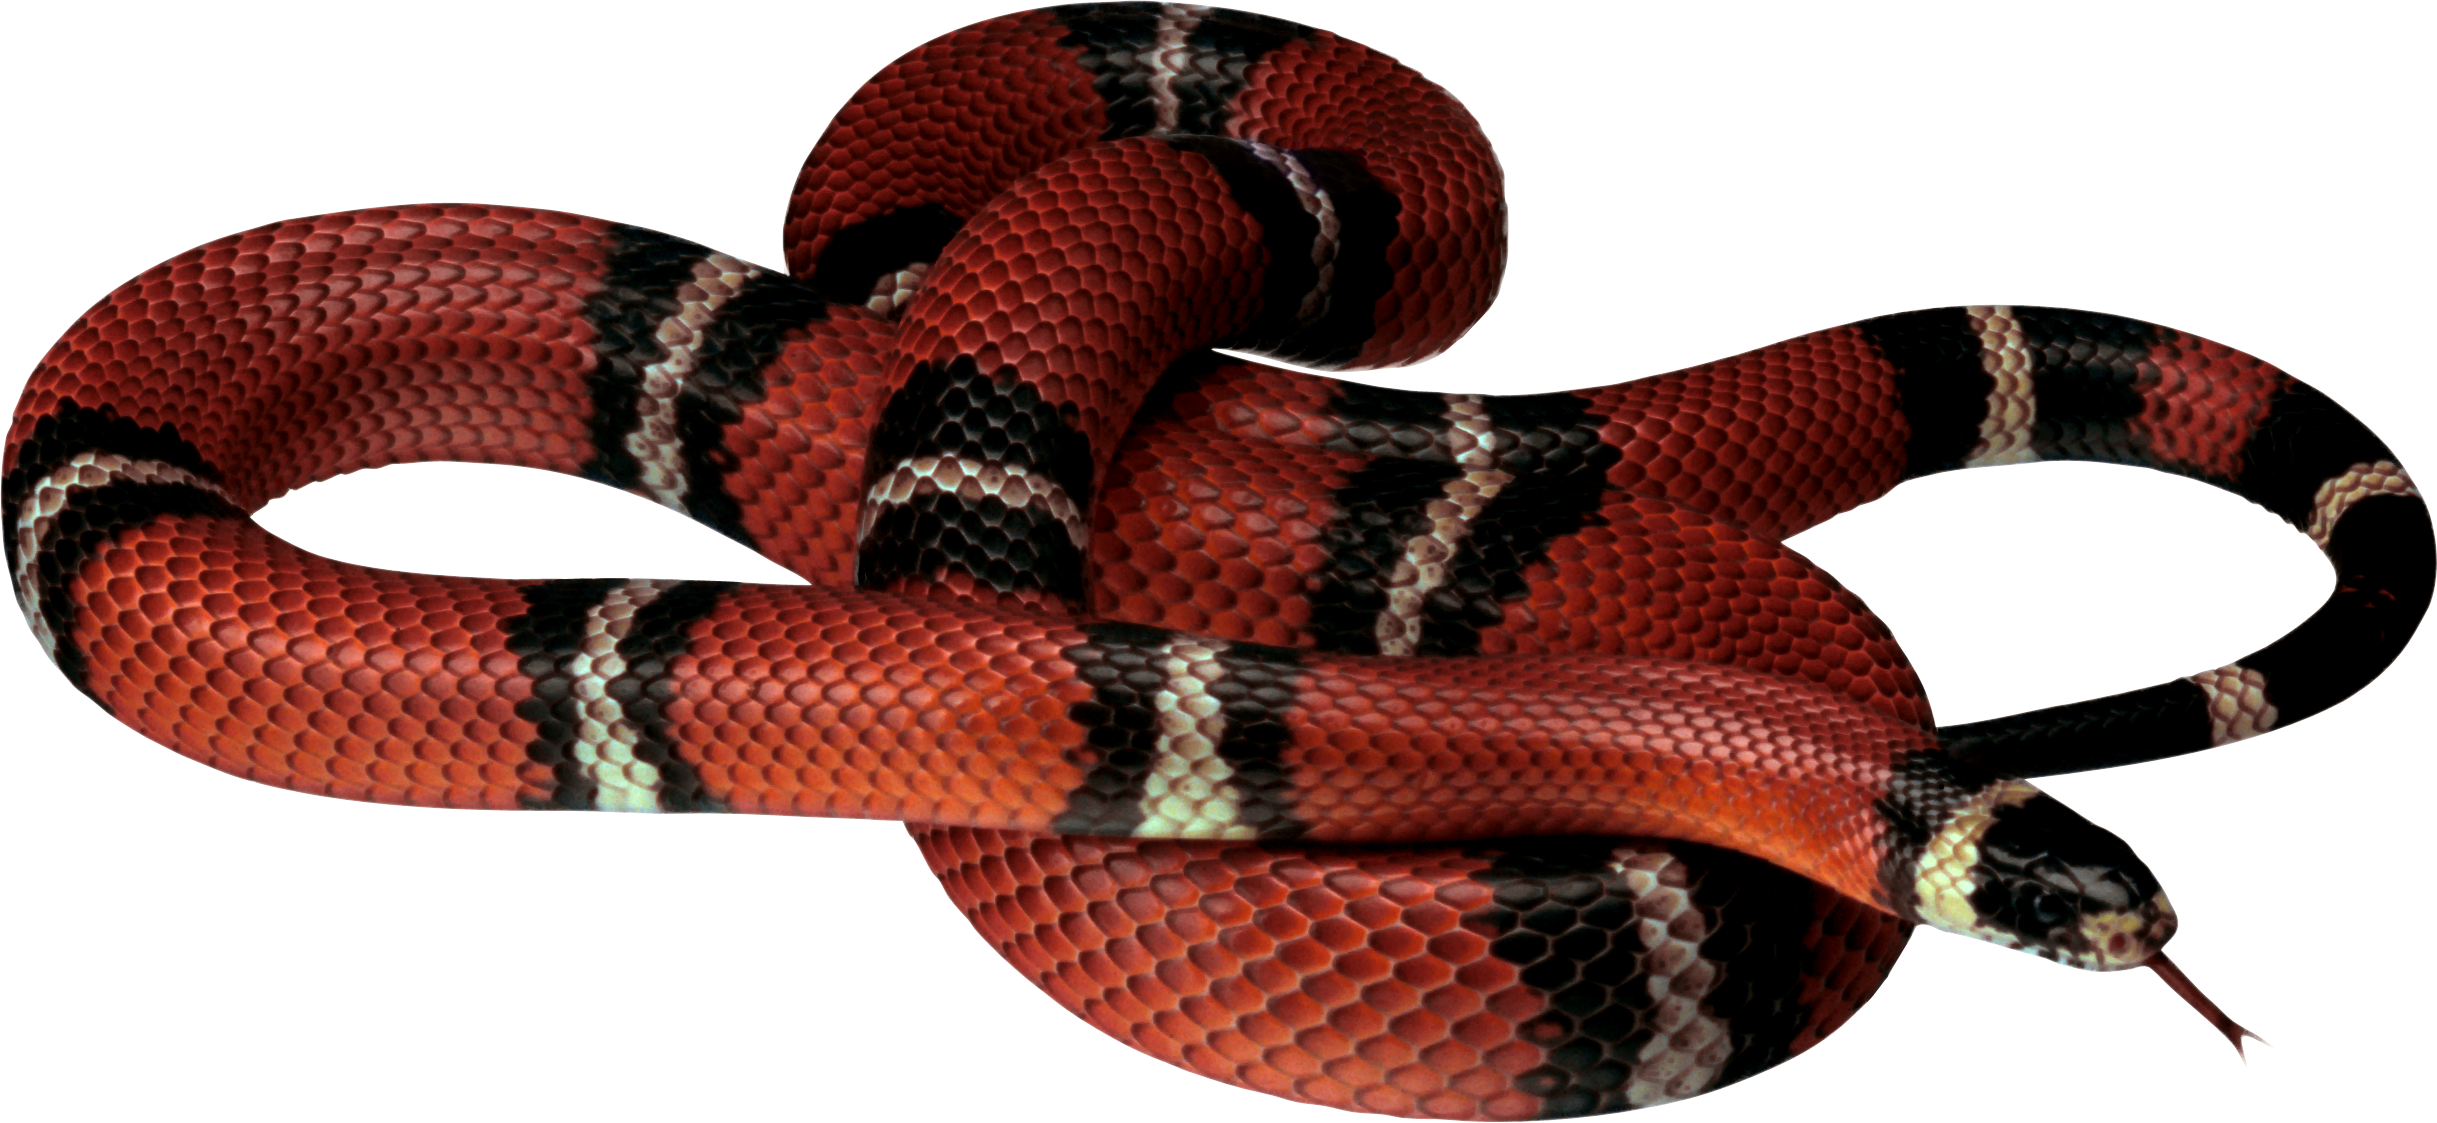 PNG HD Snake - 148726